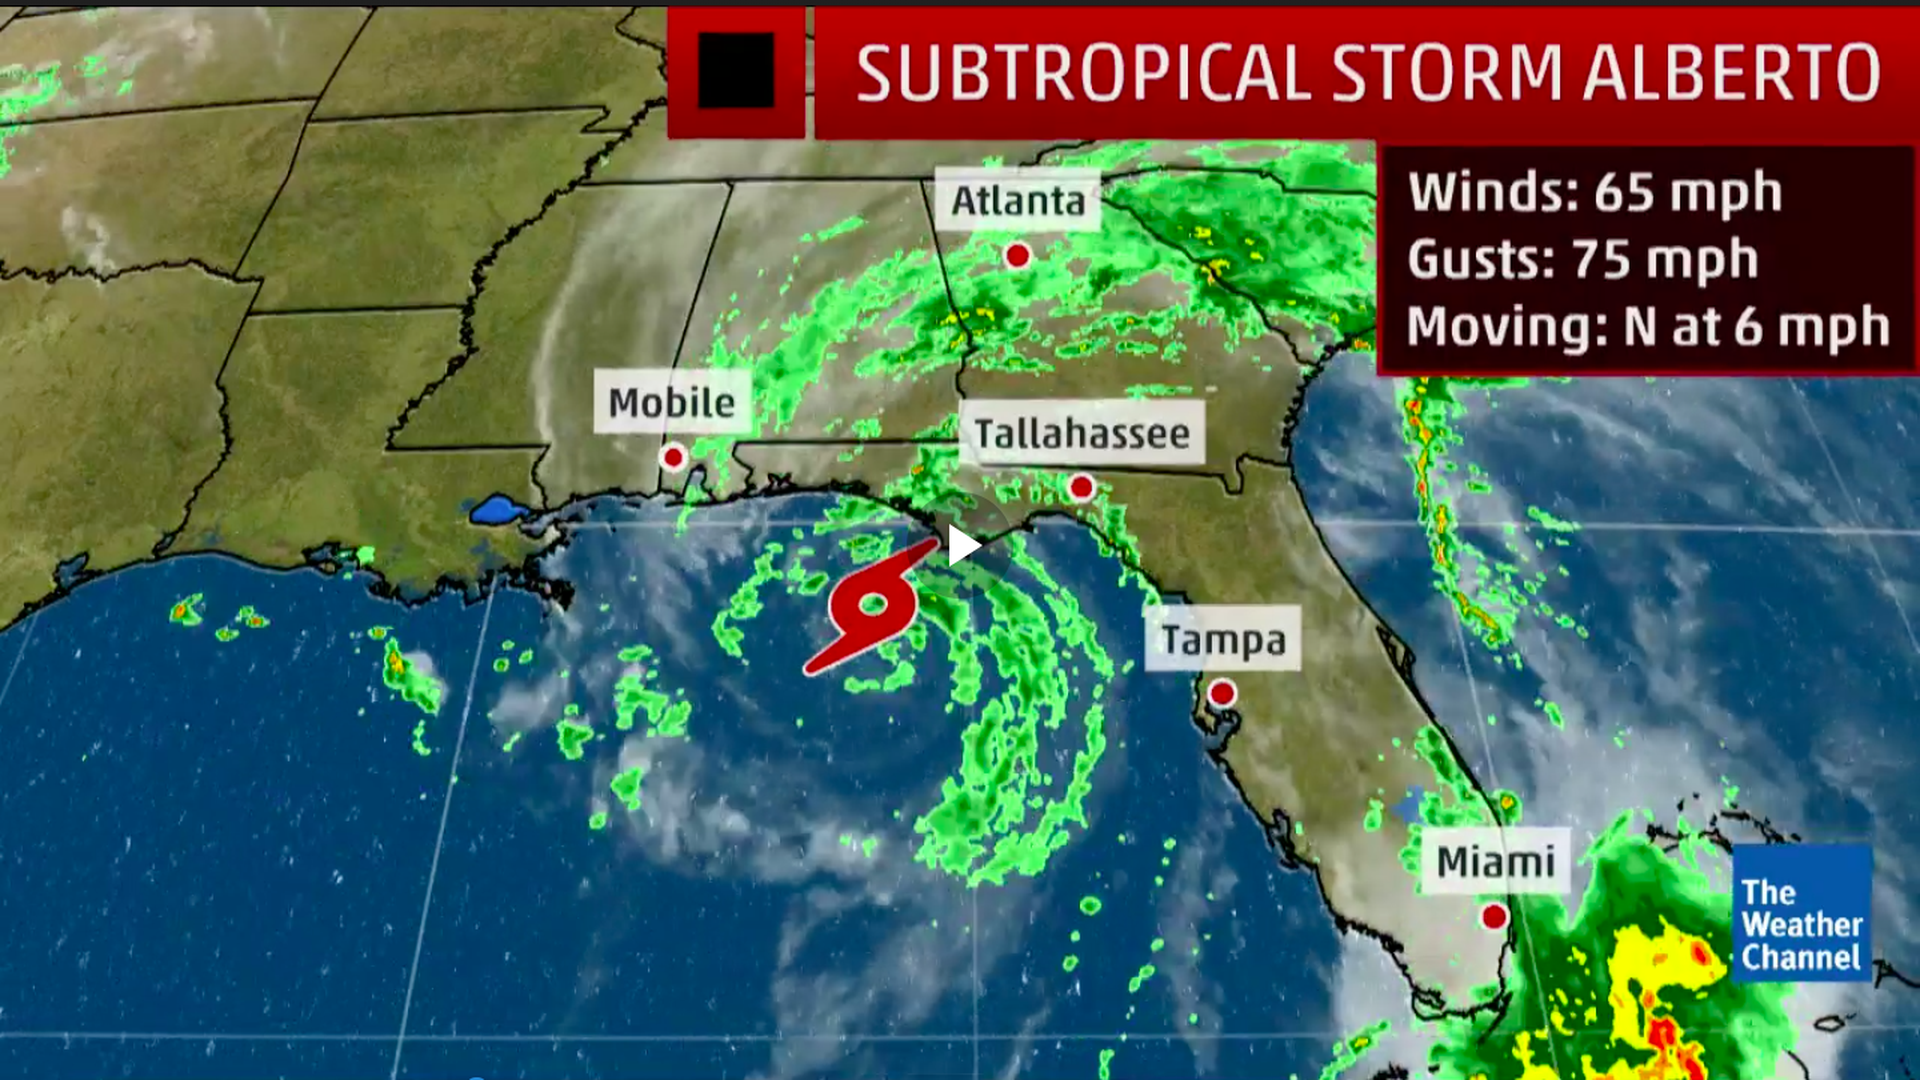 Subtropical Storm Alberto is moving towards the Gulf Coast.